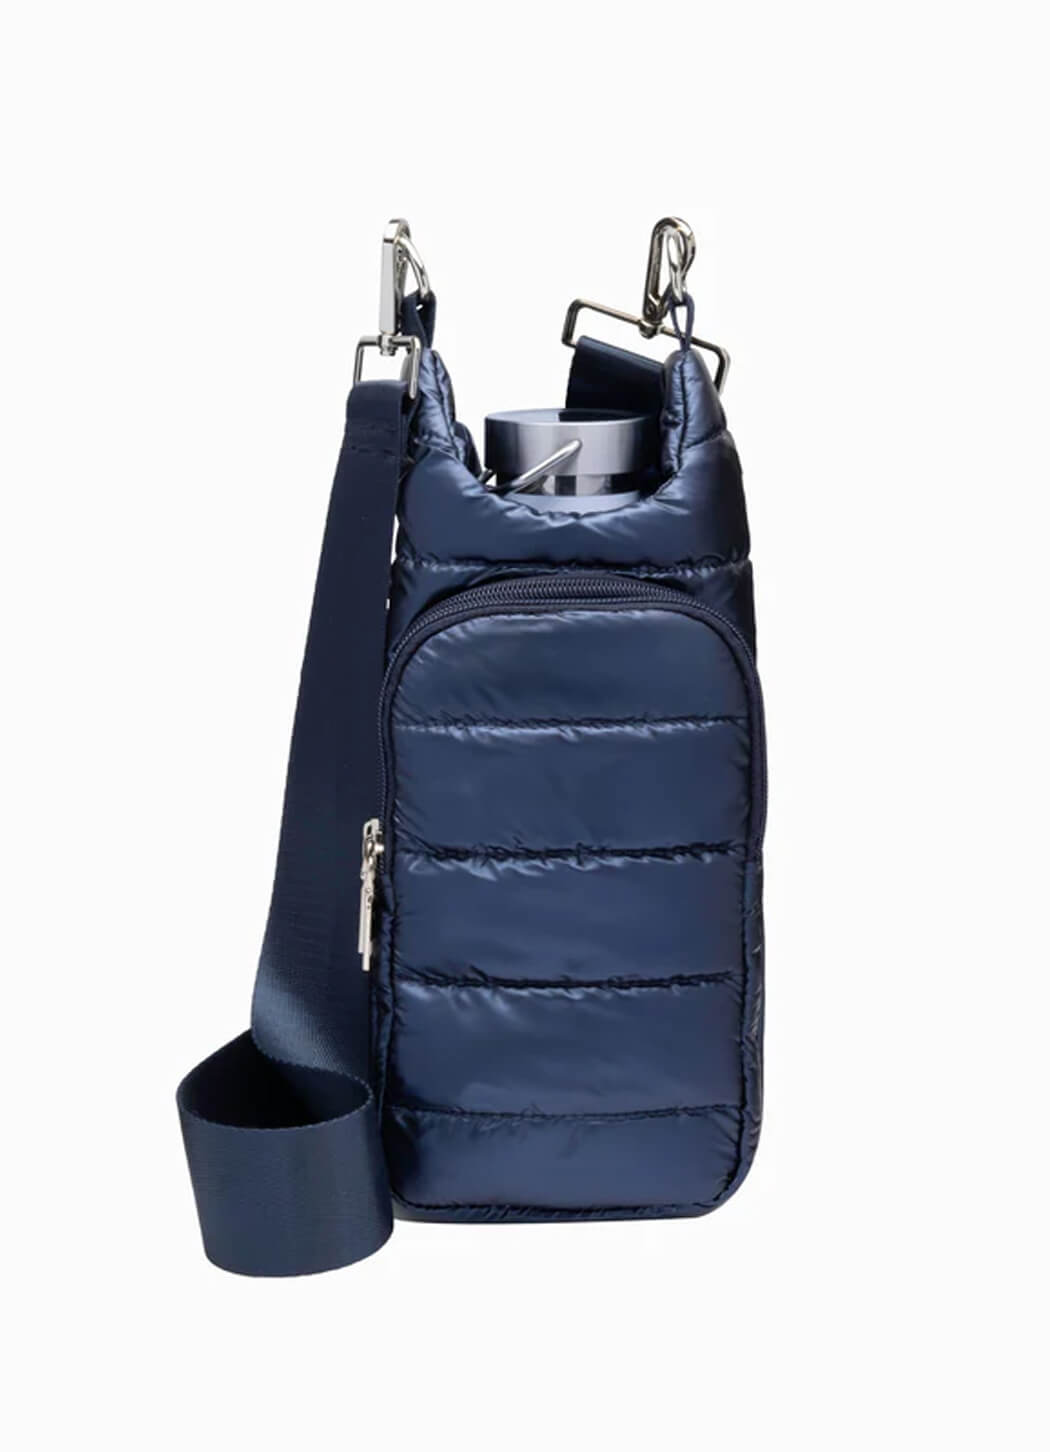 WanderFull Navy Blue Shiny HydroBag with Matching Navy Solid Strap